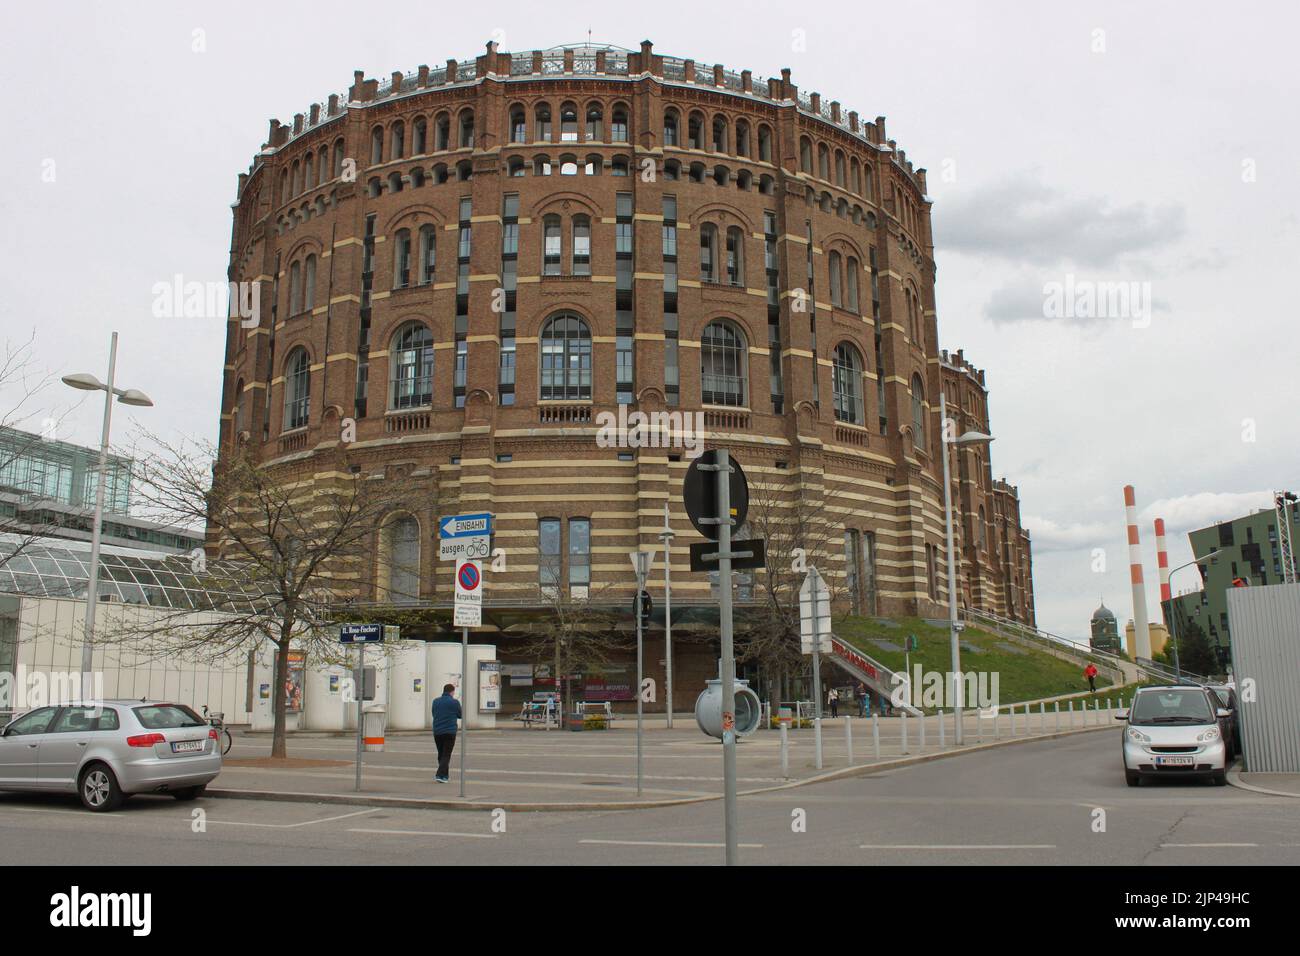 Vienna, Austria - 23 April 2012: Former gasholders (The Vienna Gasometers) in Simmering district Stock Photo